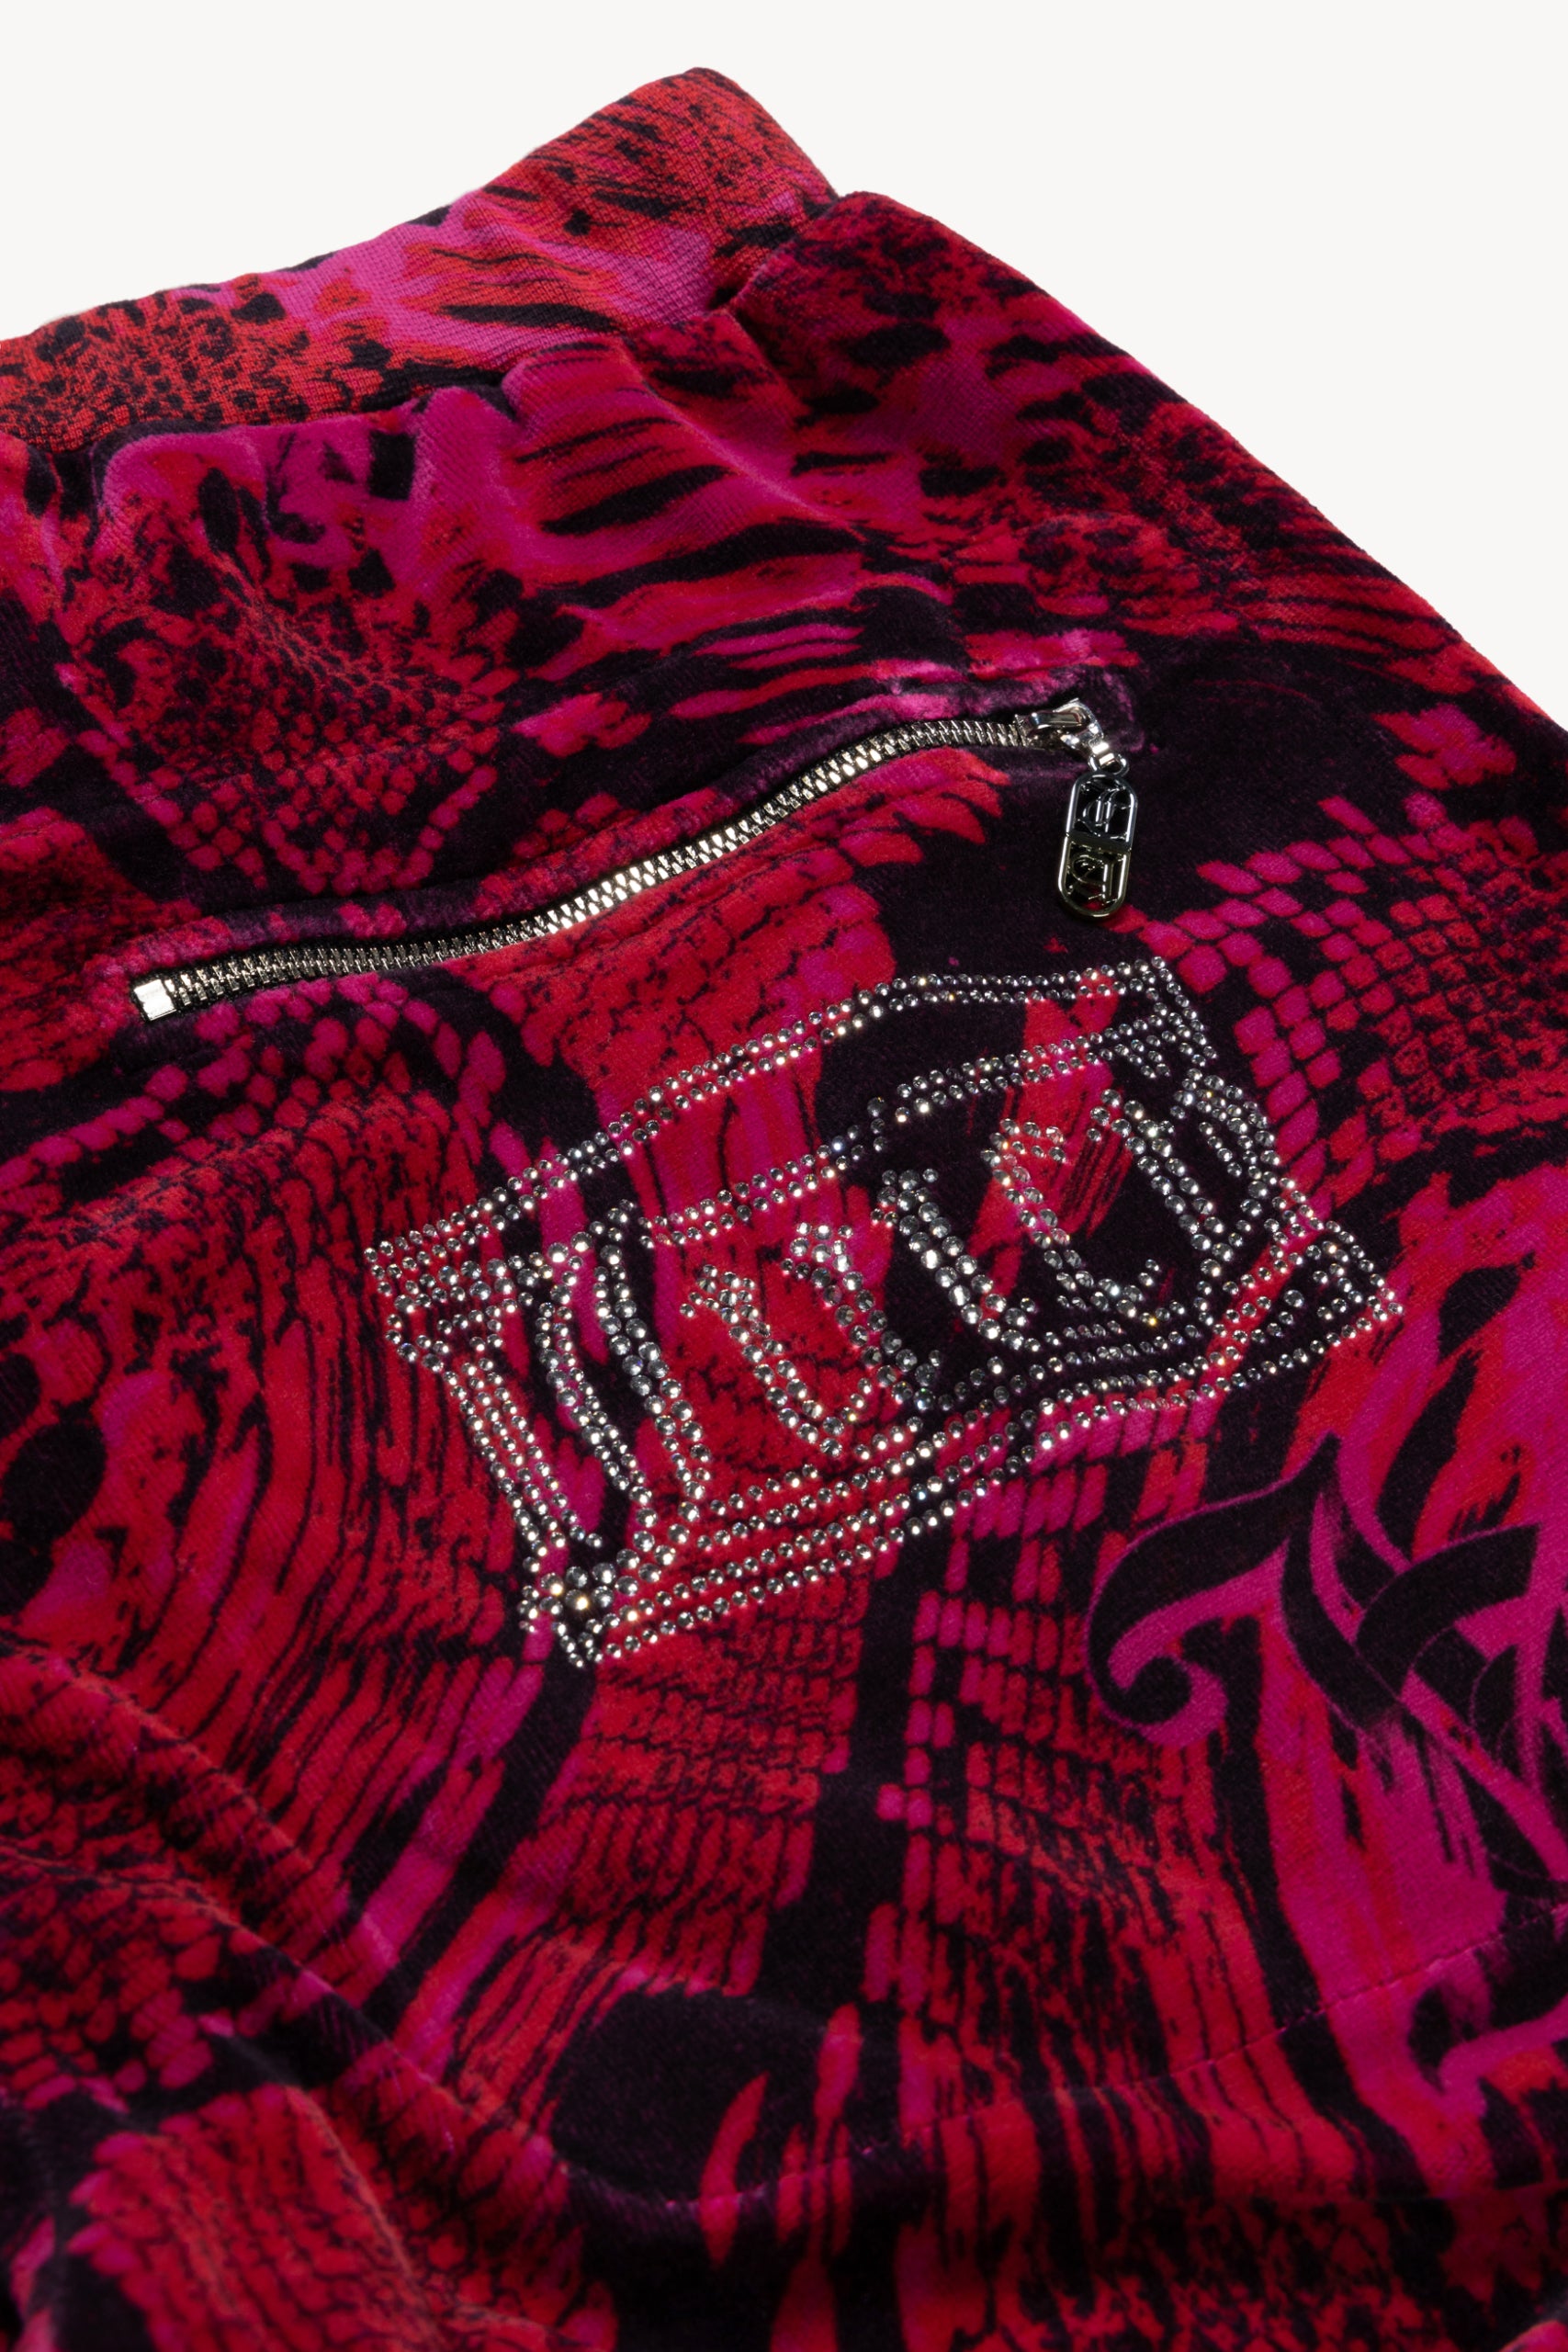 Load image into Gallery viewer, Aries x Juicy Couture Psysnake Unisex Sweatpant